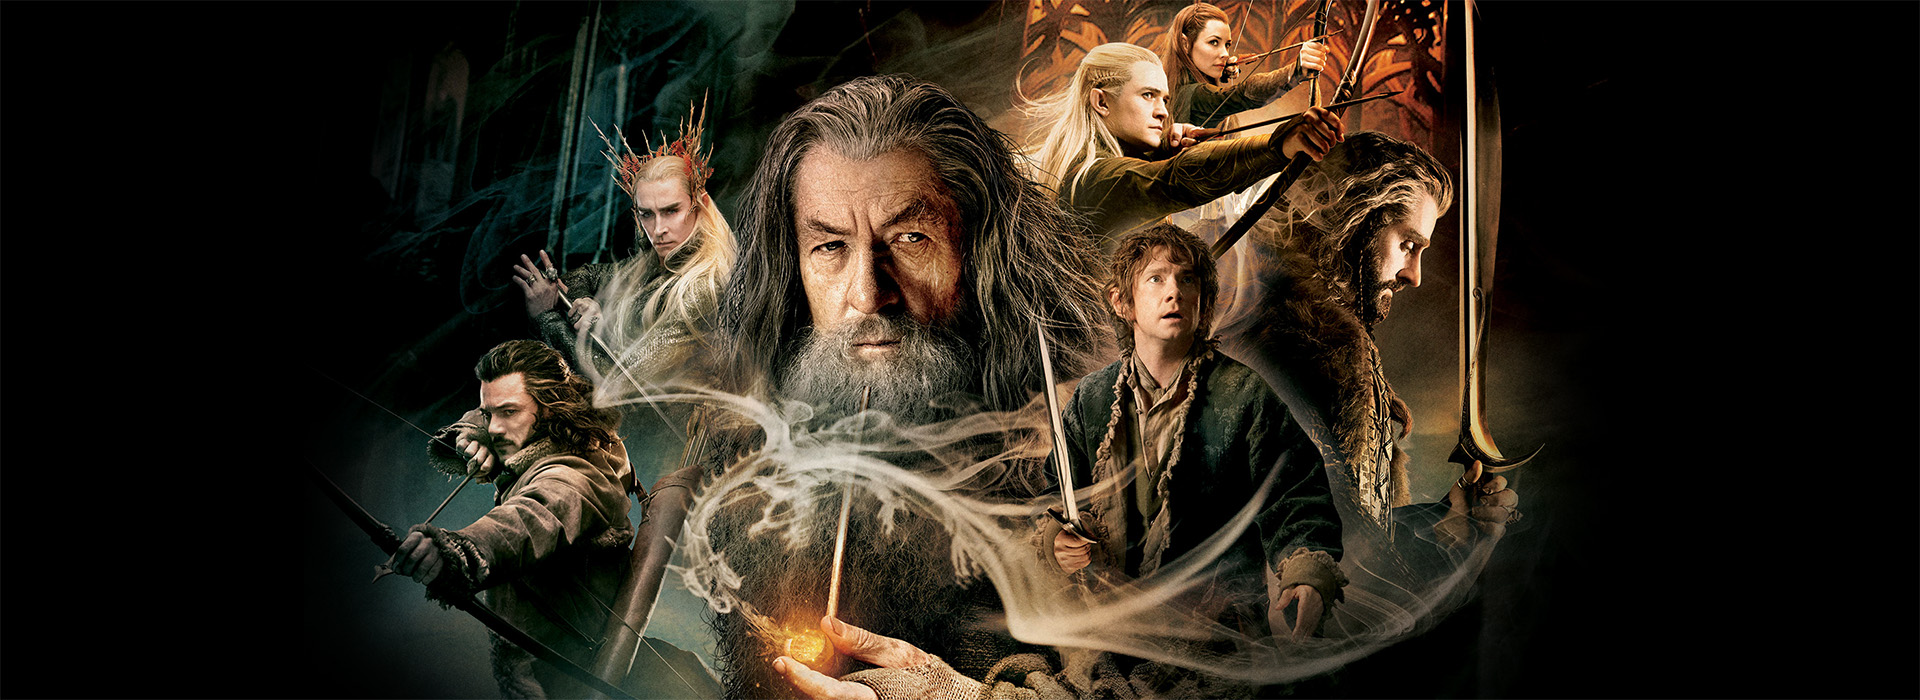 Movie poster The Hobbit: The Desolation of Smaug